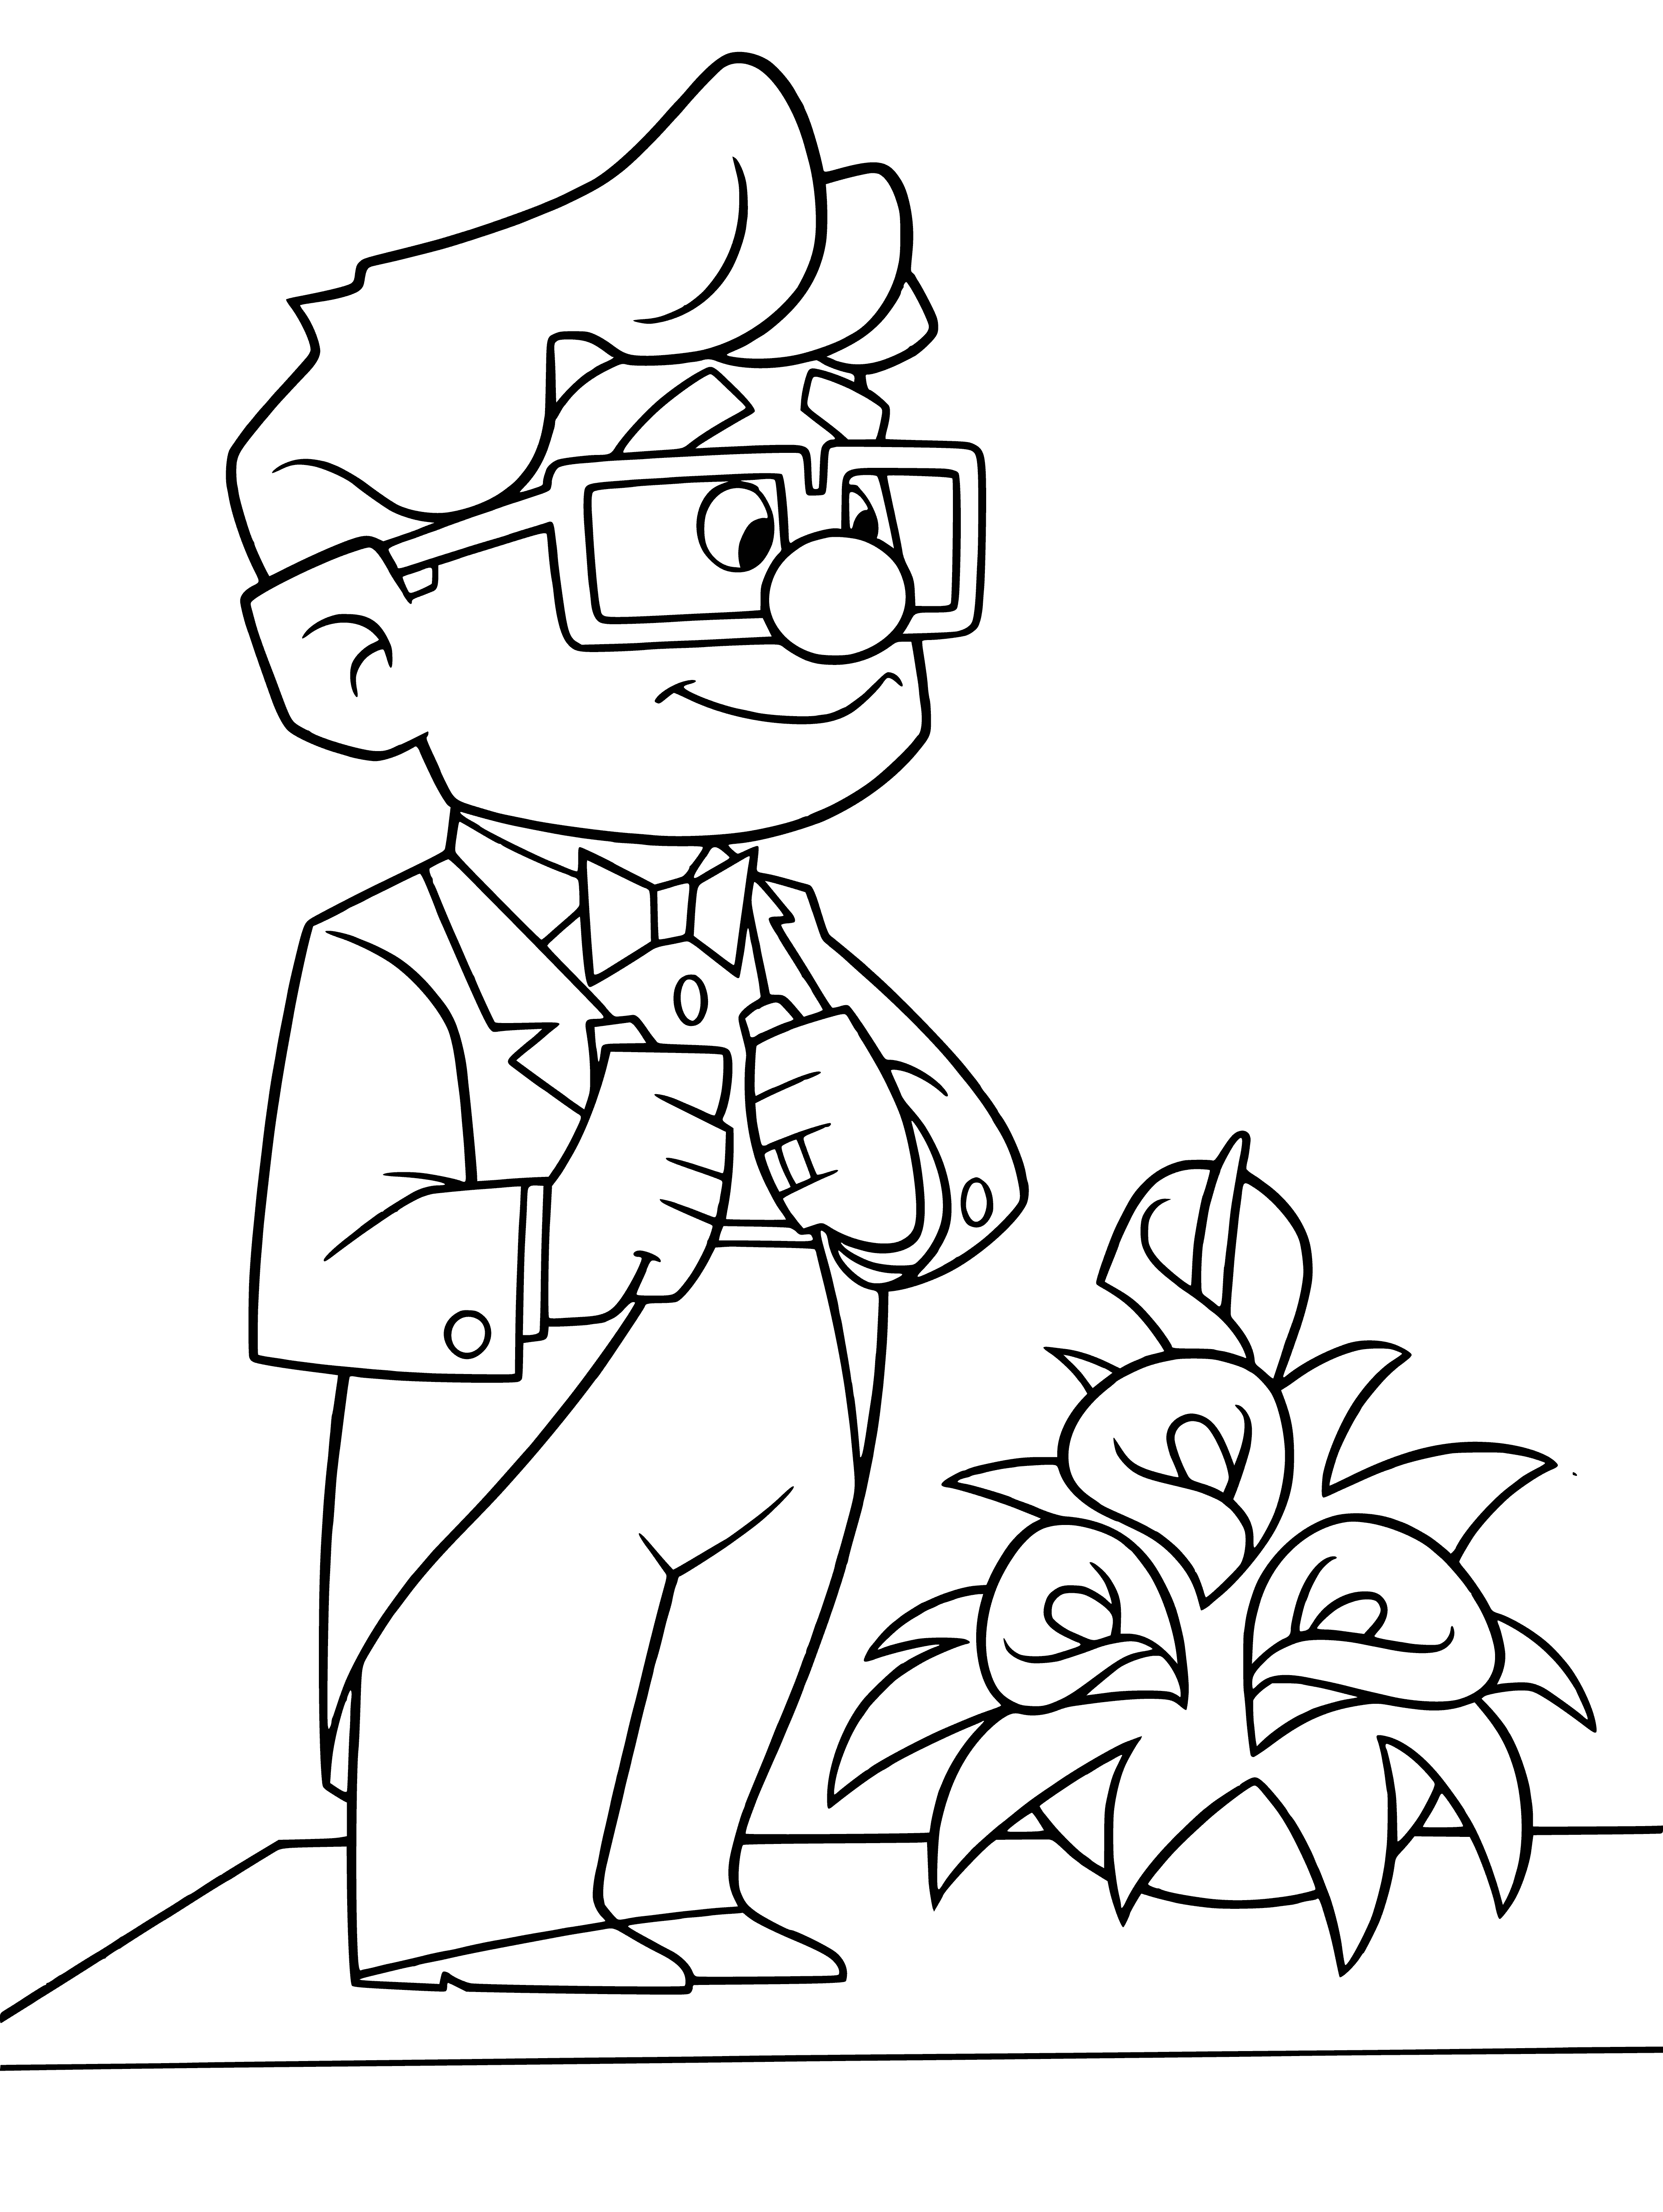 coloring page: Man in blue suit w/ white shirt & red tie, holding flowers, standing in front of window. Dark hair & beard.